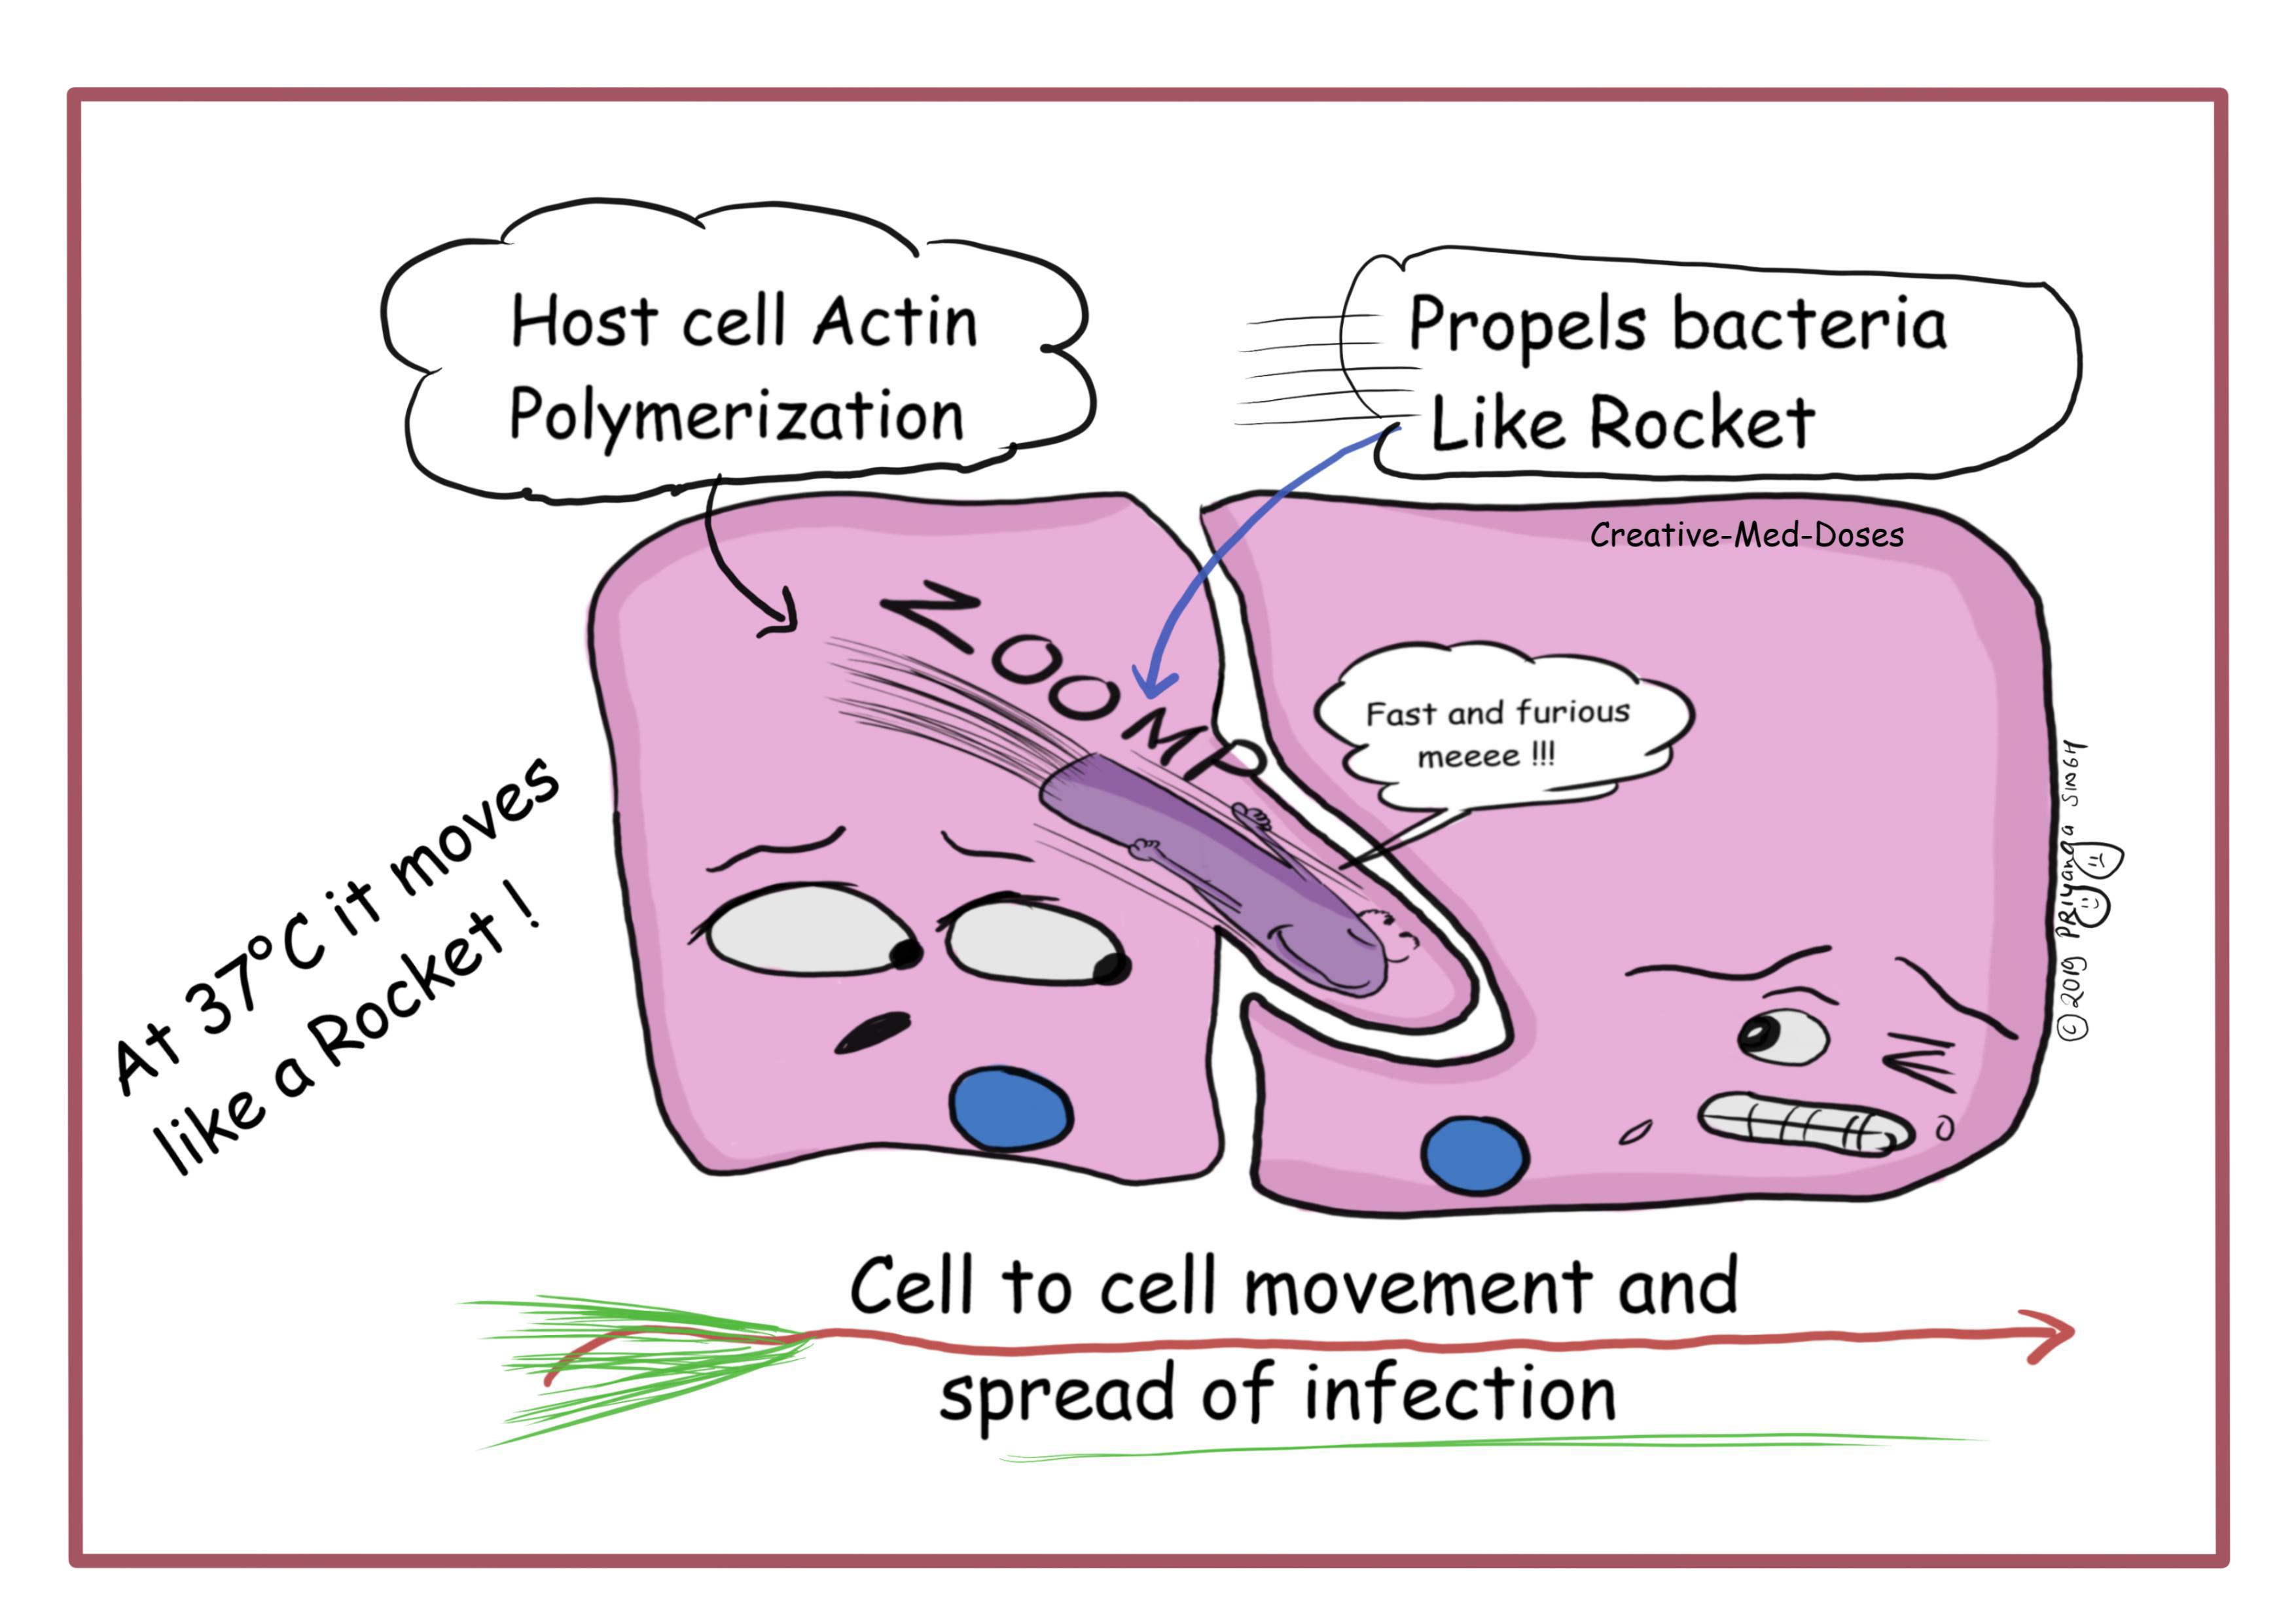 Listeria-actin polymerization and Rocket tail